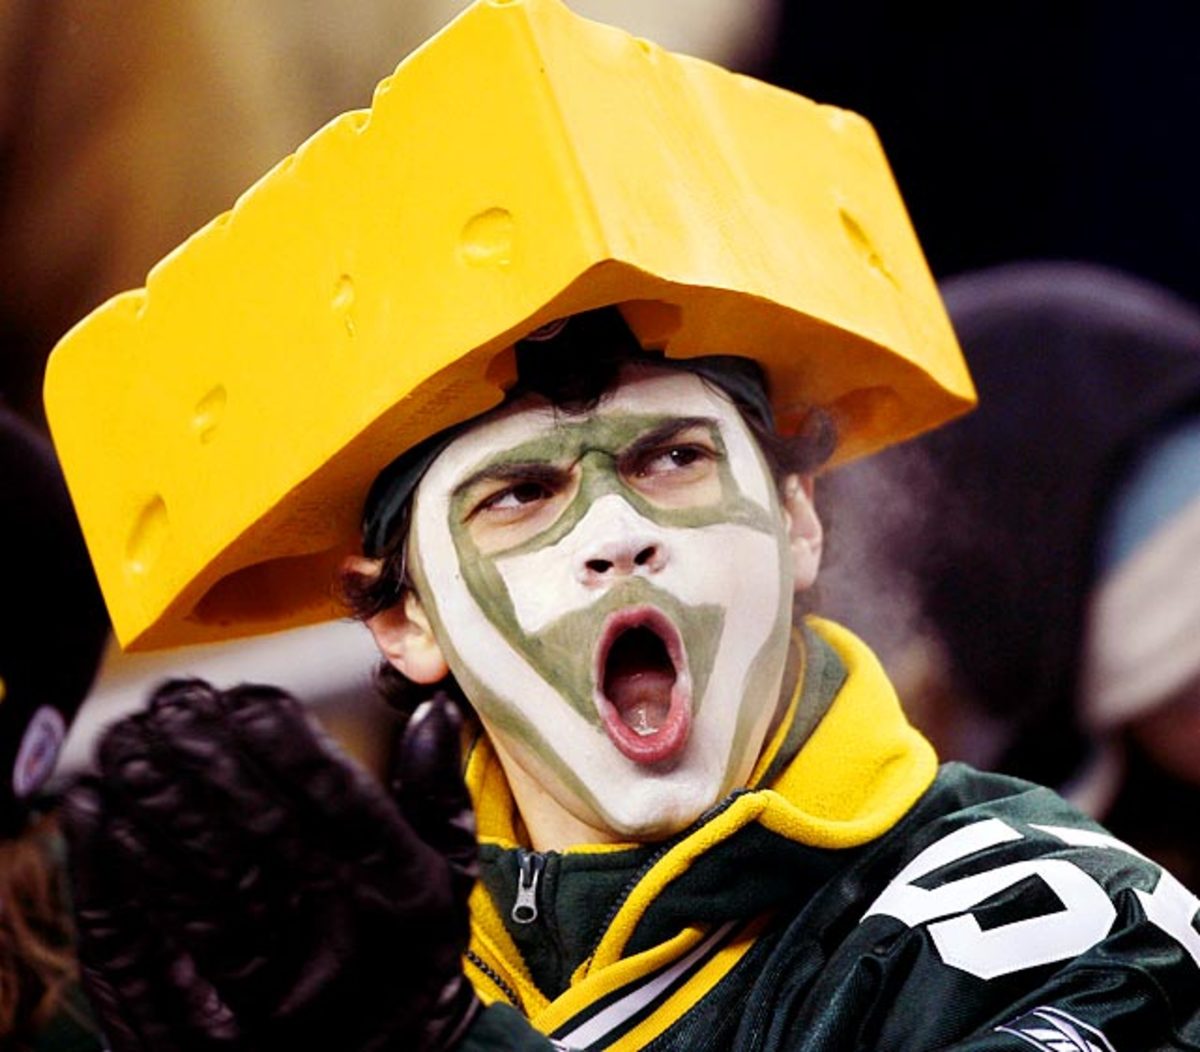 Best head gear at the dome - #vikings fan with cheese grat…